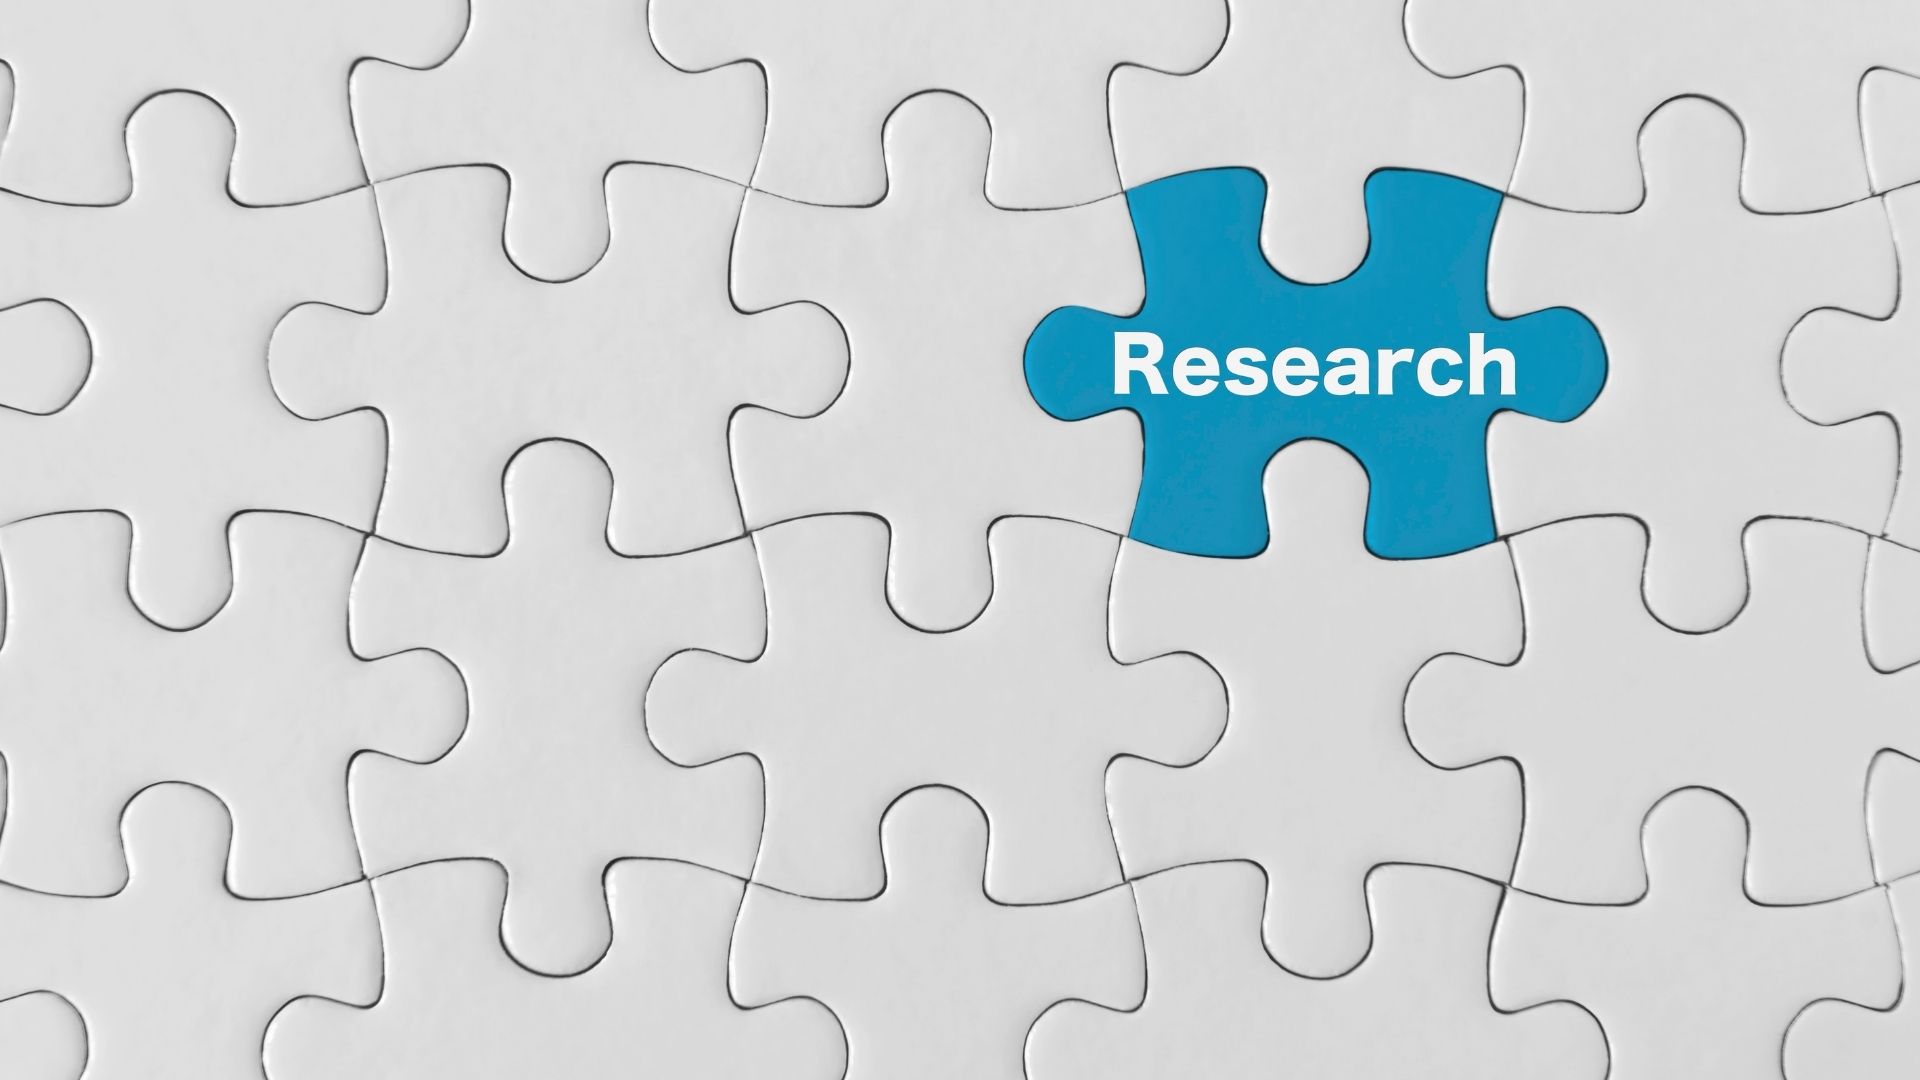 white puzzle pieces interlock, among them is one blue puzzle piece with the word research on it